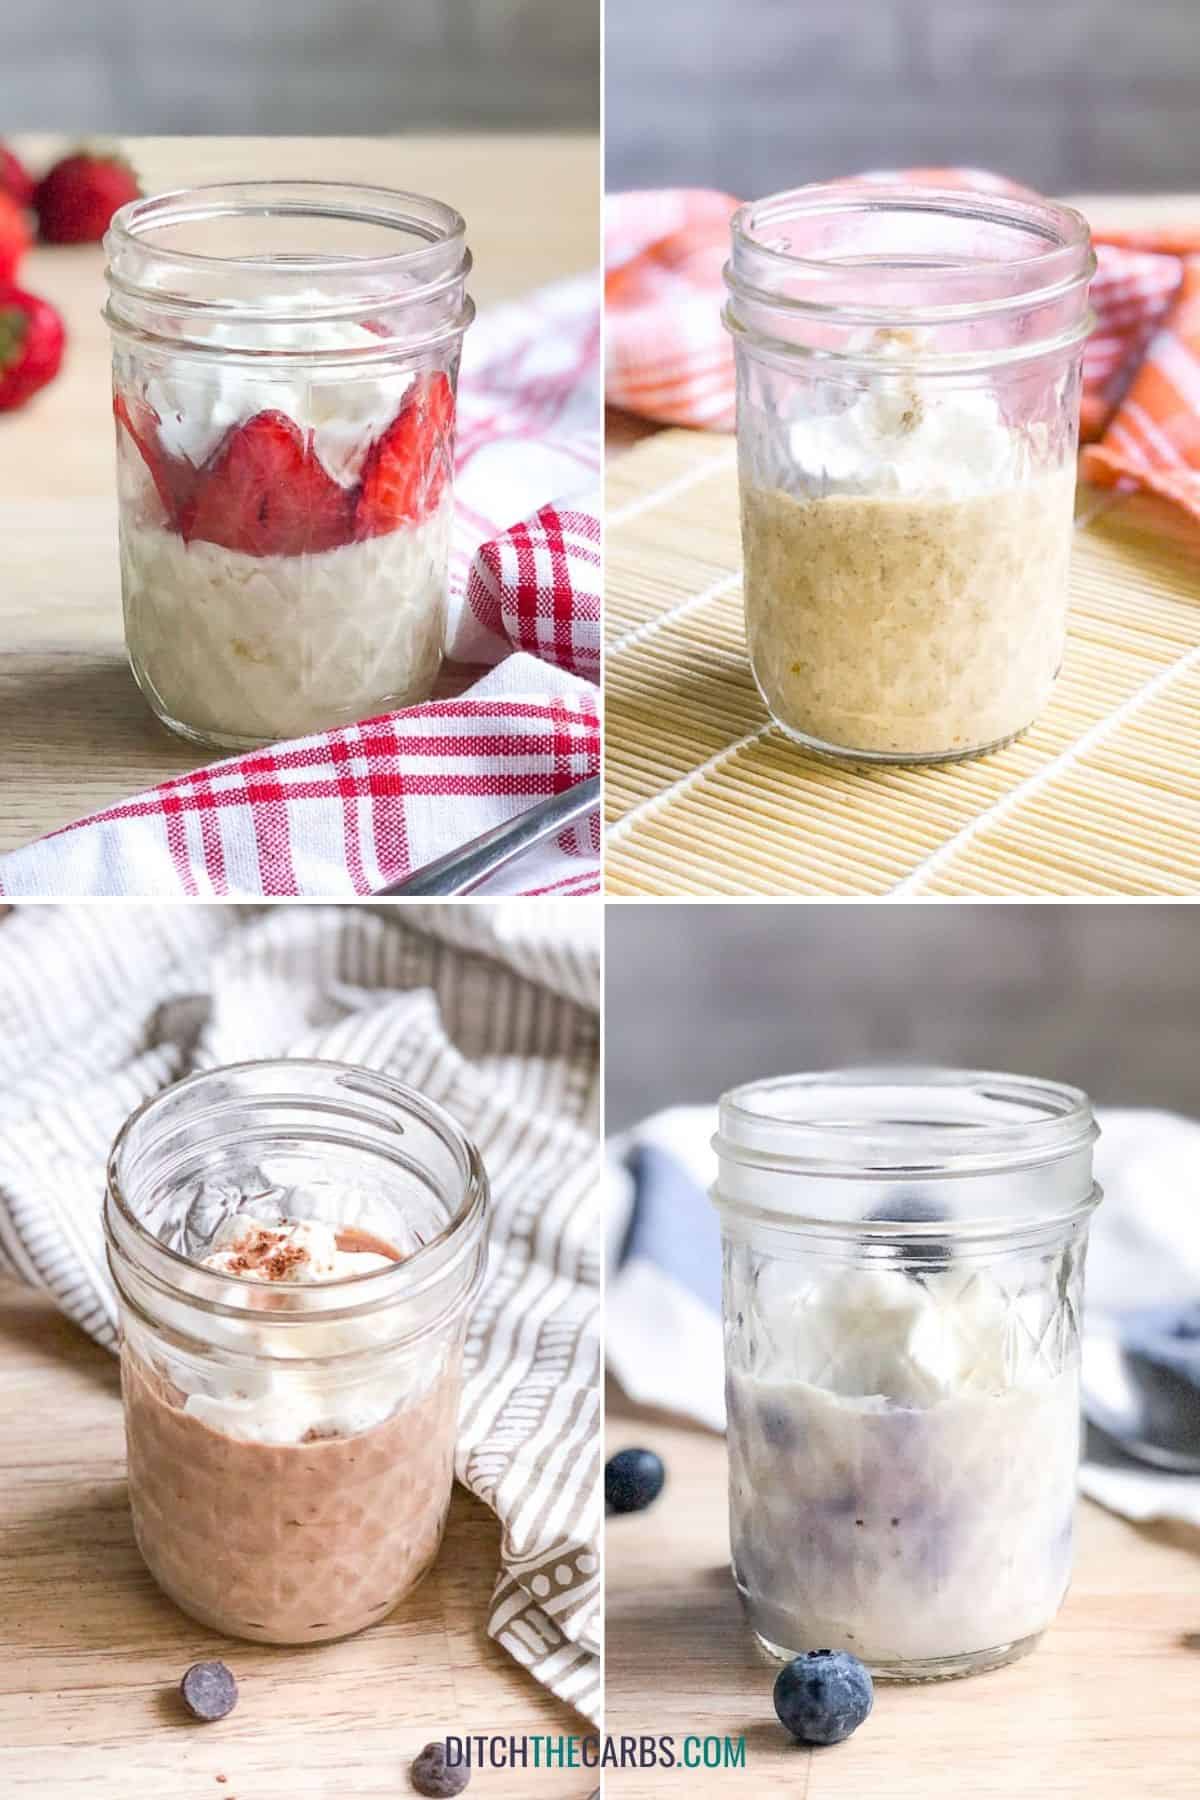 A collage of 4 pictures showing a strawberry, pumpkin spice, "Nutella", and blueberry mug cheesecake in a clear glass jar.